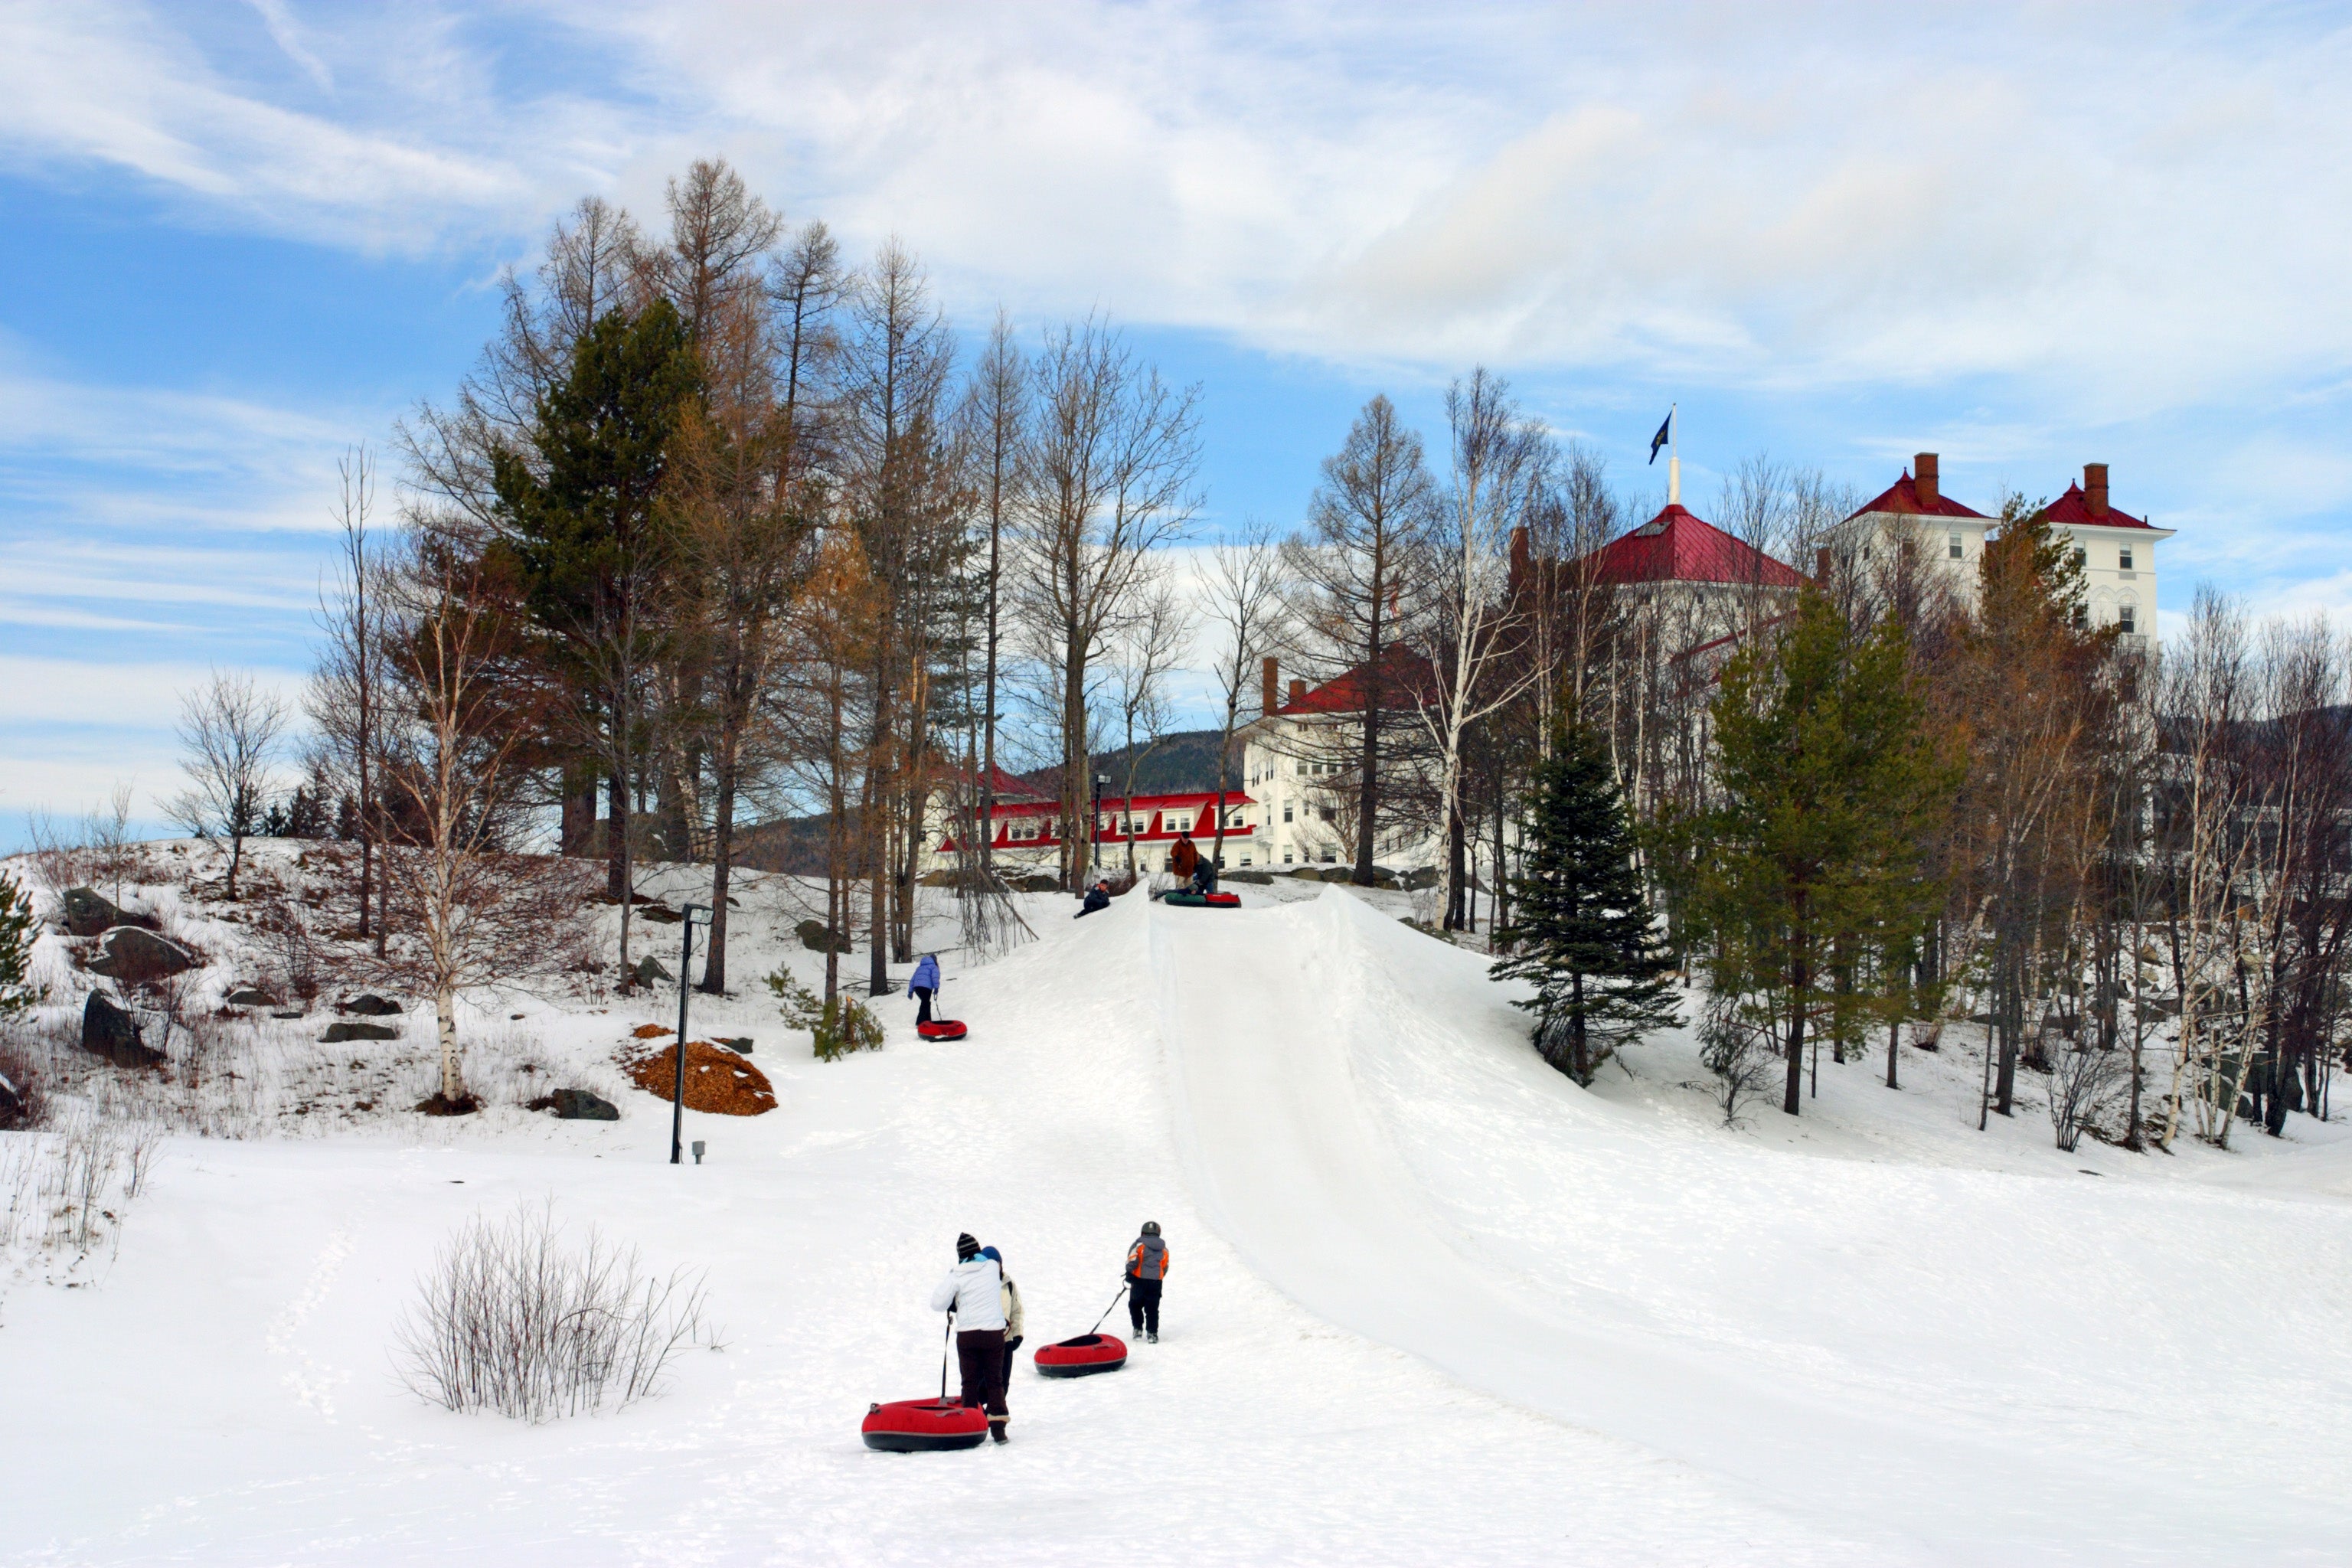 New Hampshire’s largest ski area, Bretton Woods offers glam slopeside stays